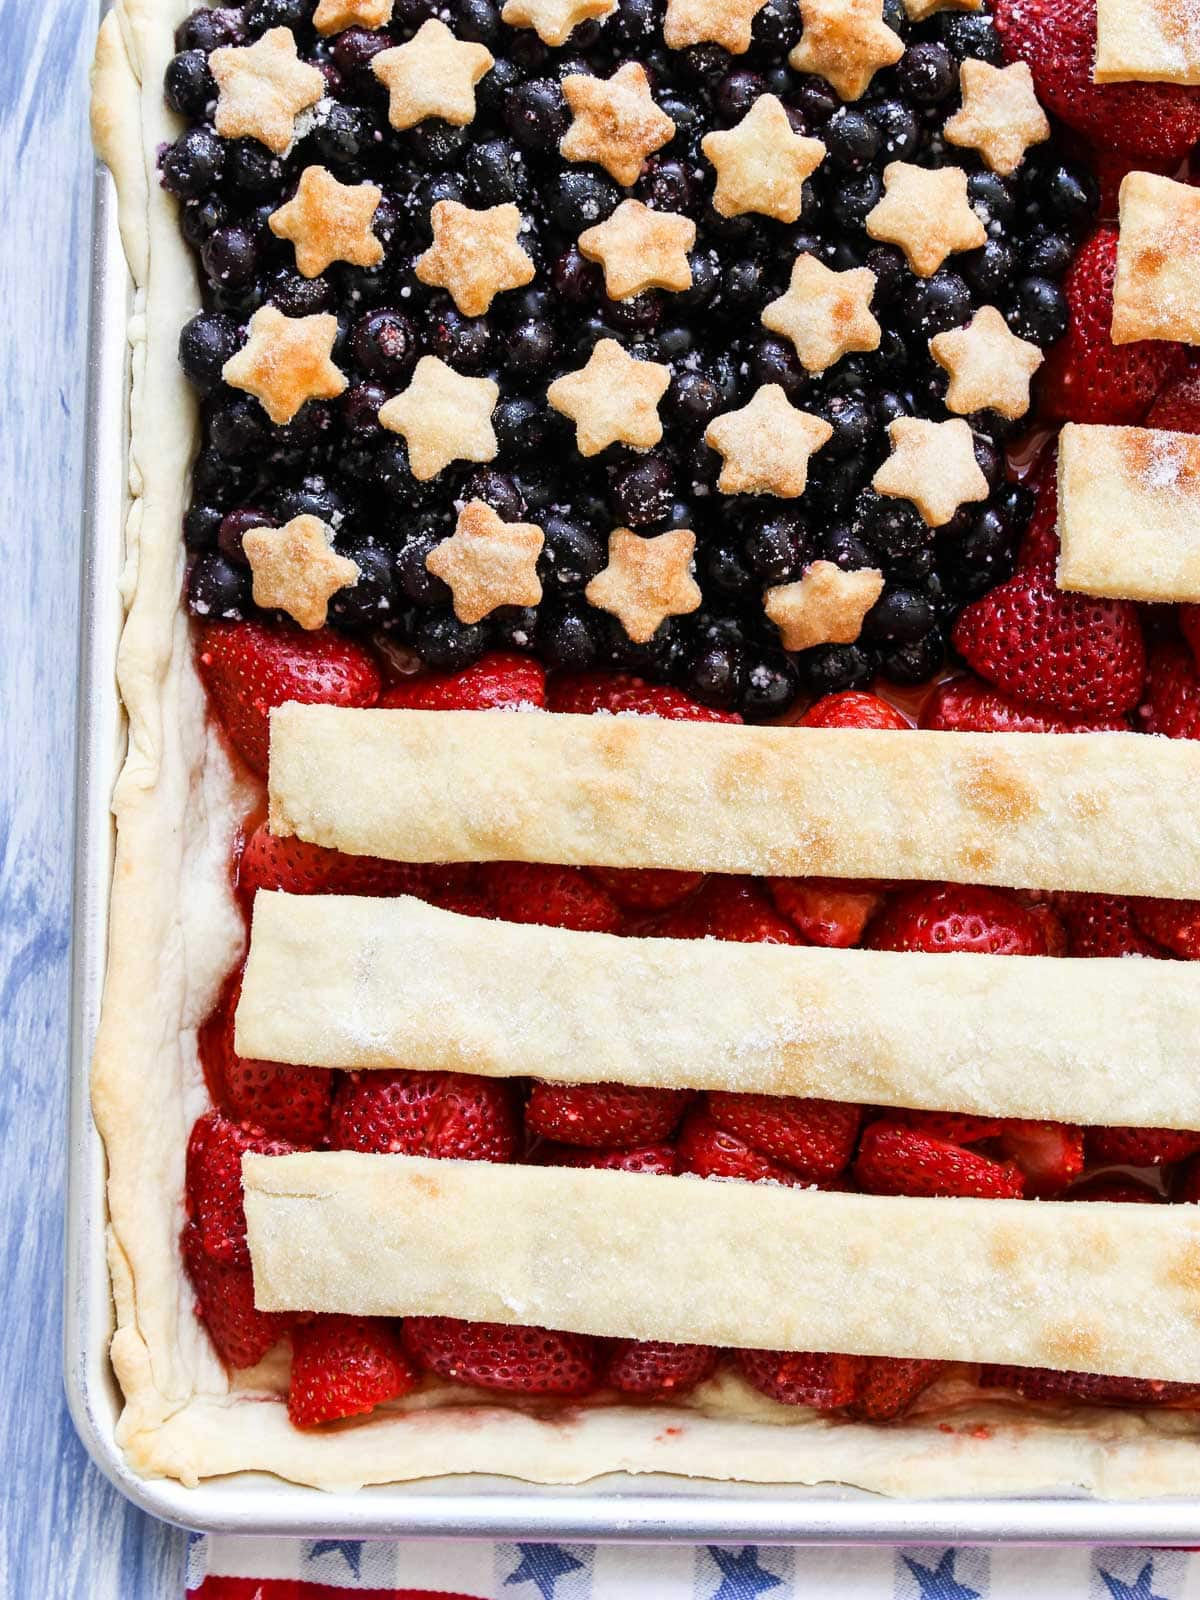 A close up view of a baked sheet pan pie shaped like an American Flag with strawberries and blueberries.